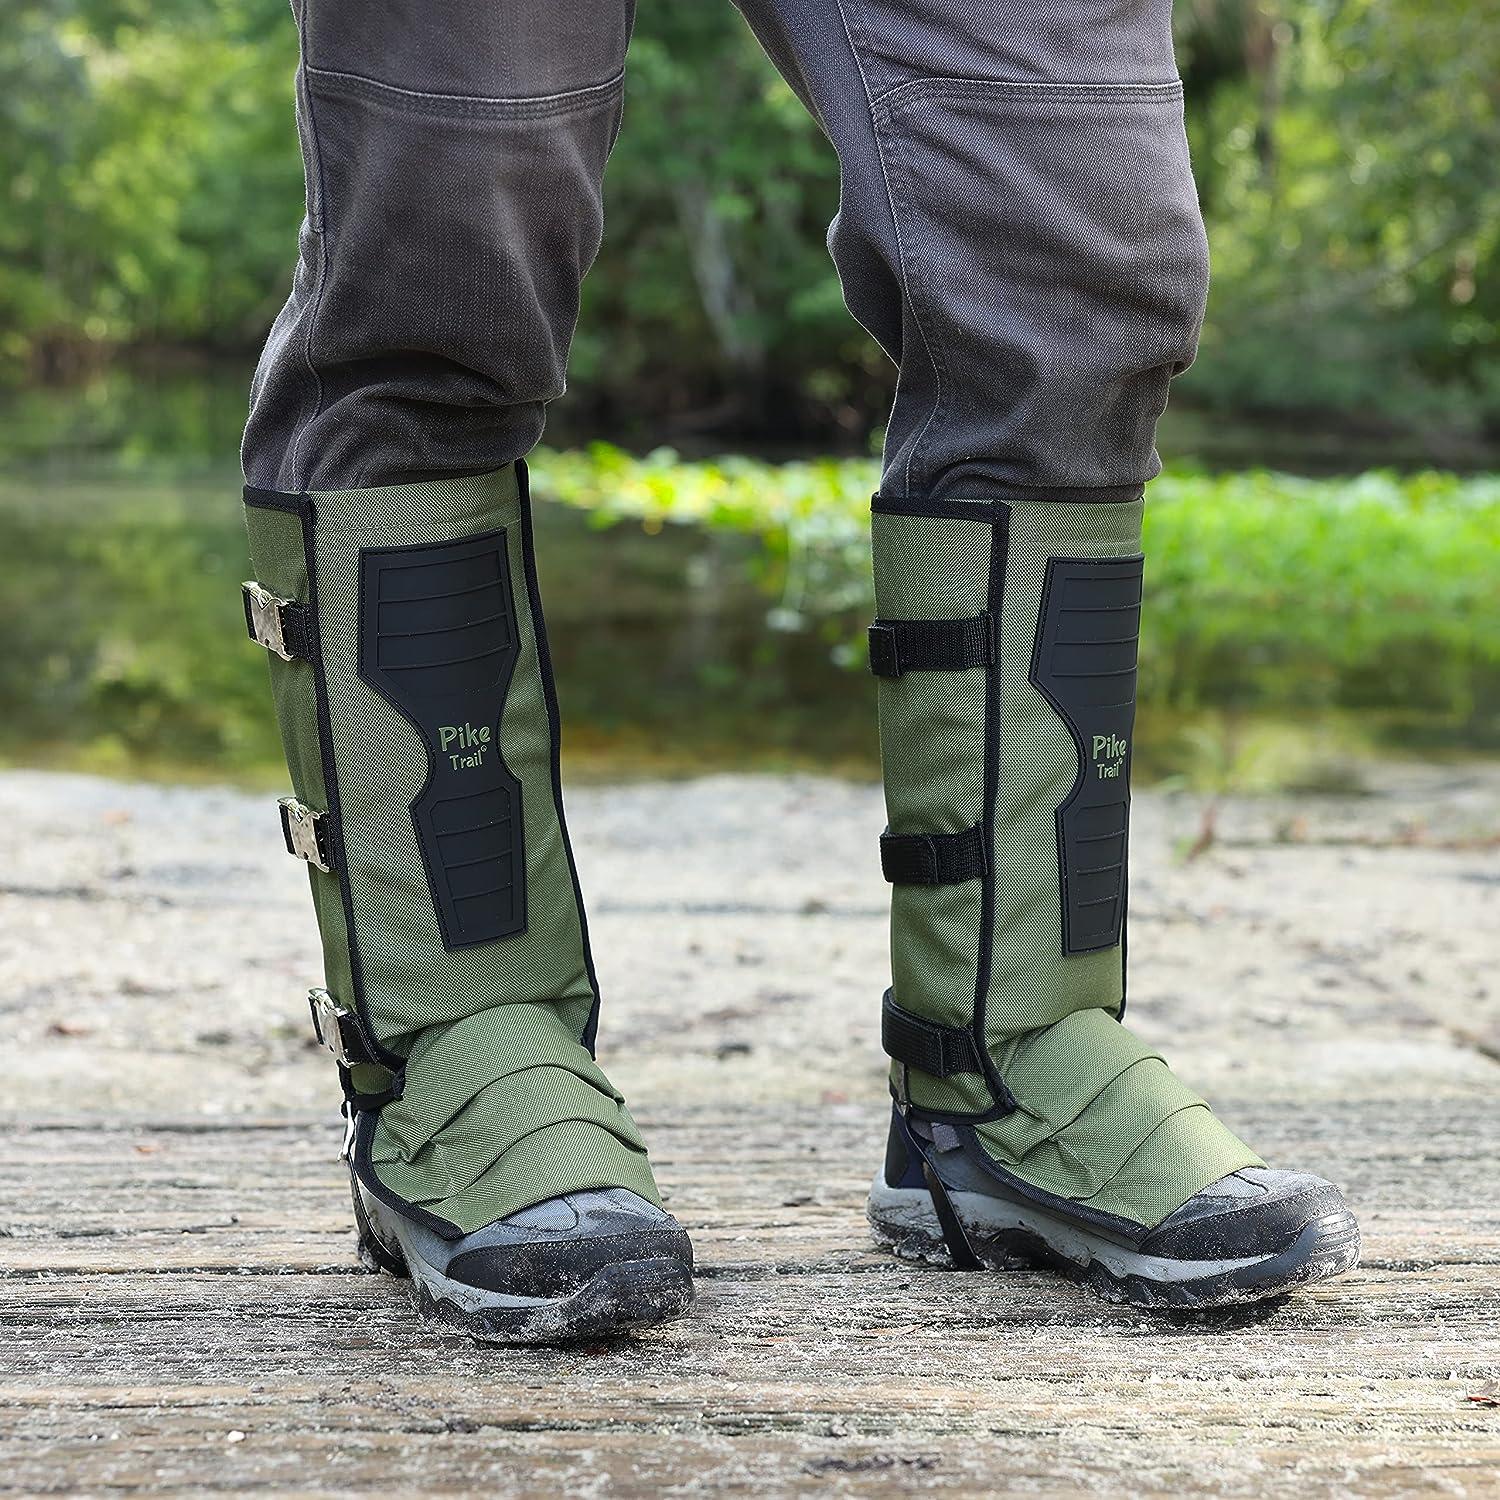  Tuff Shins Snake Leggings - Snake Bite Gaiter Guards for Men &  Women - Protection Outdoors while Hiking & Hunting - one Size : Sports &  Outdoors